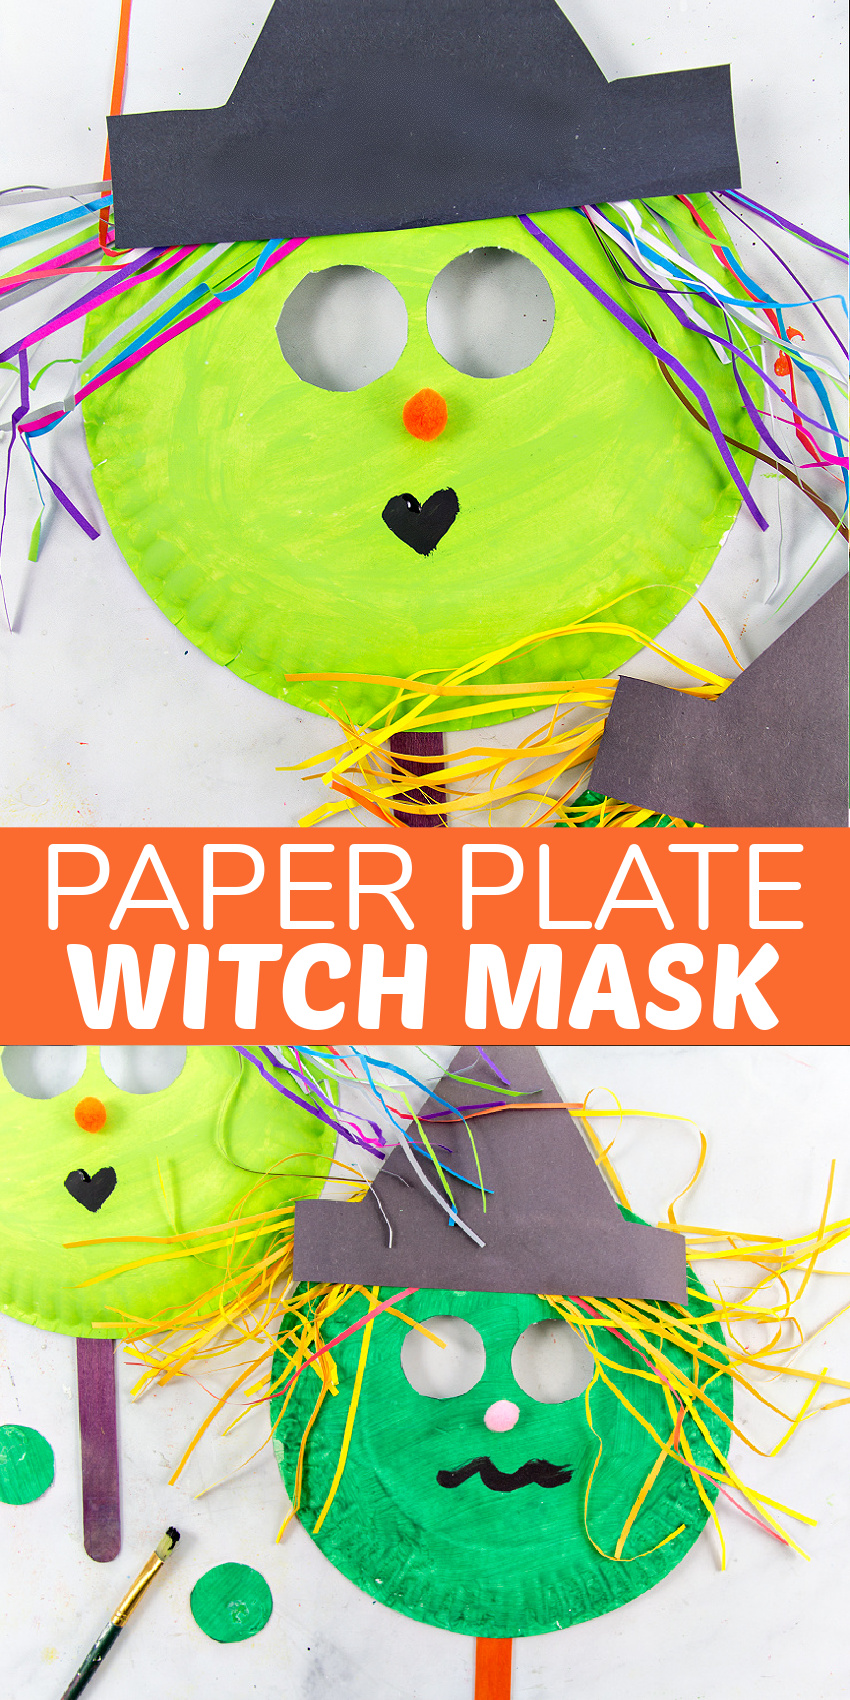 paper plate witch mask halloween pinterest image